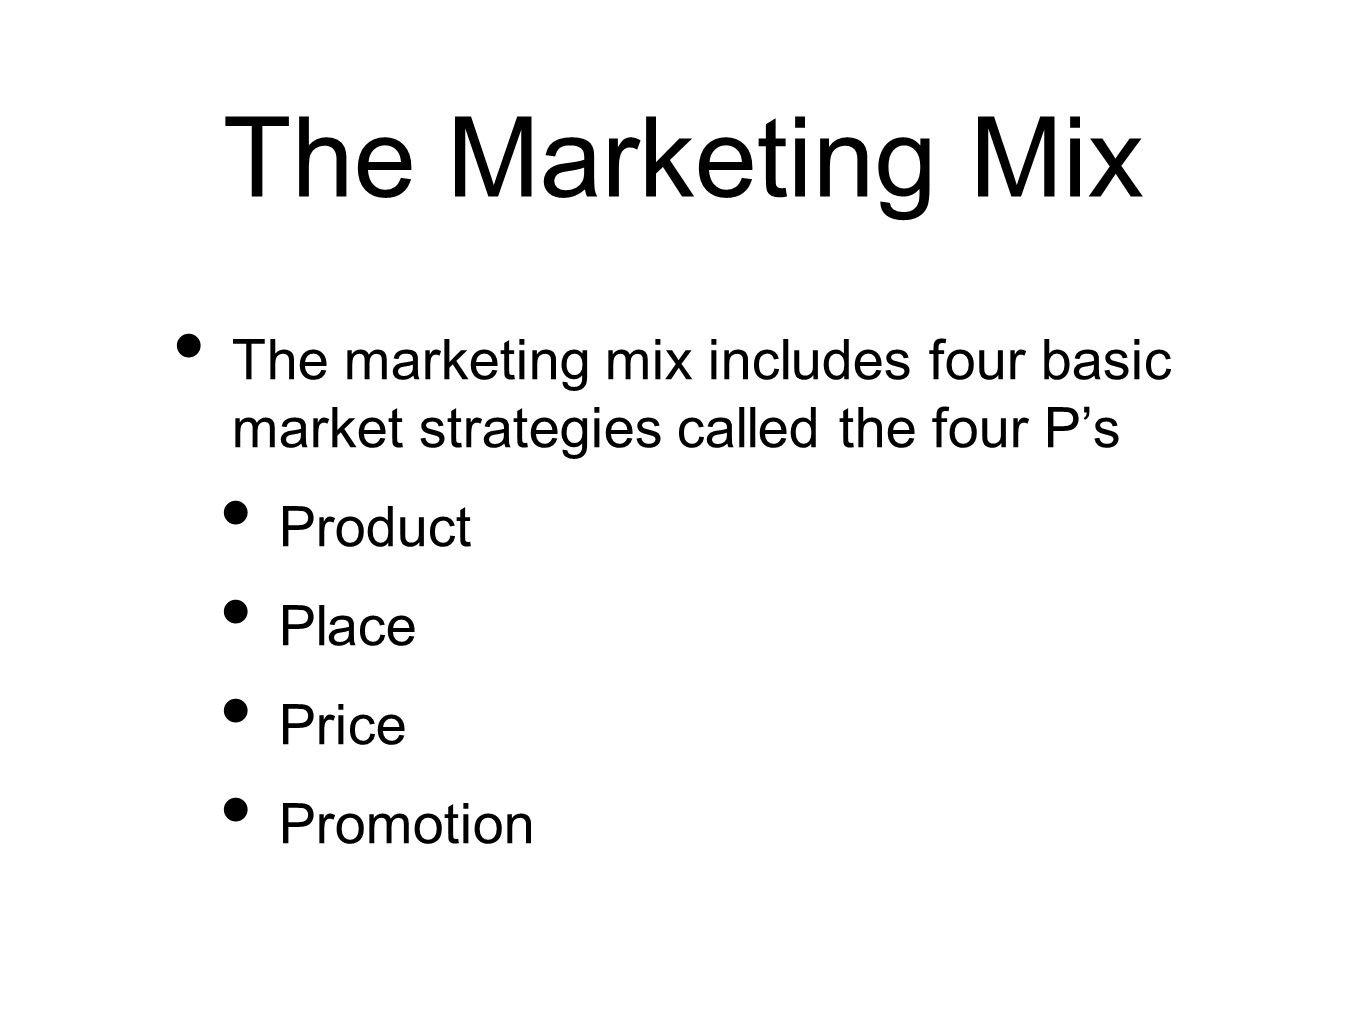 The Marketing Mix The marketing mix includes four basic market strategies called the four P’s Product Place Price Promotion